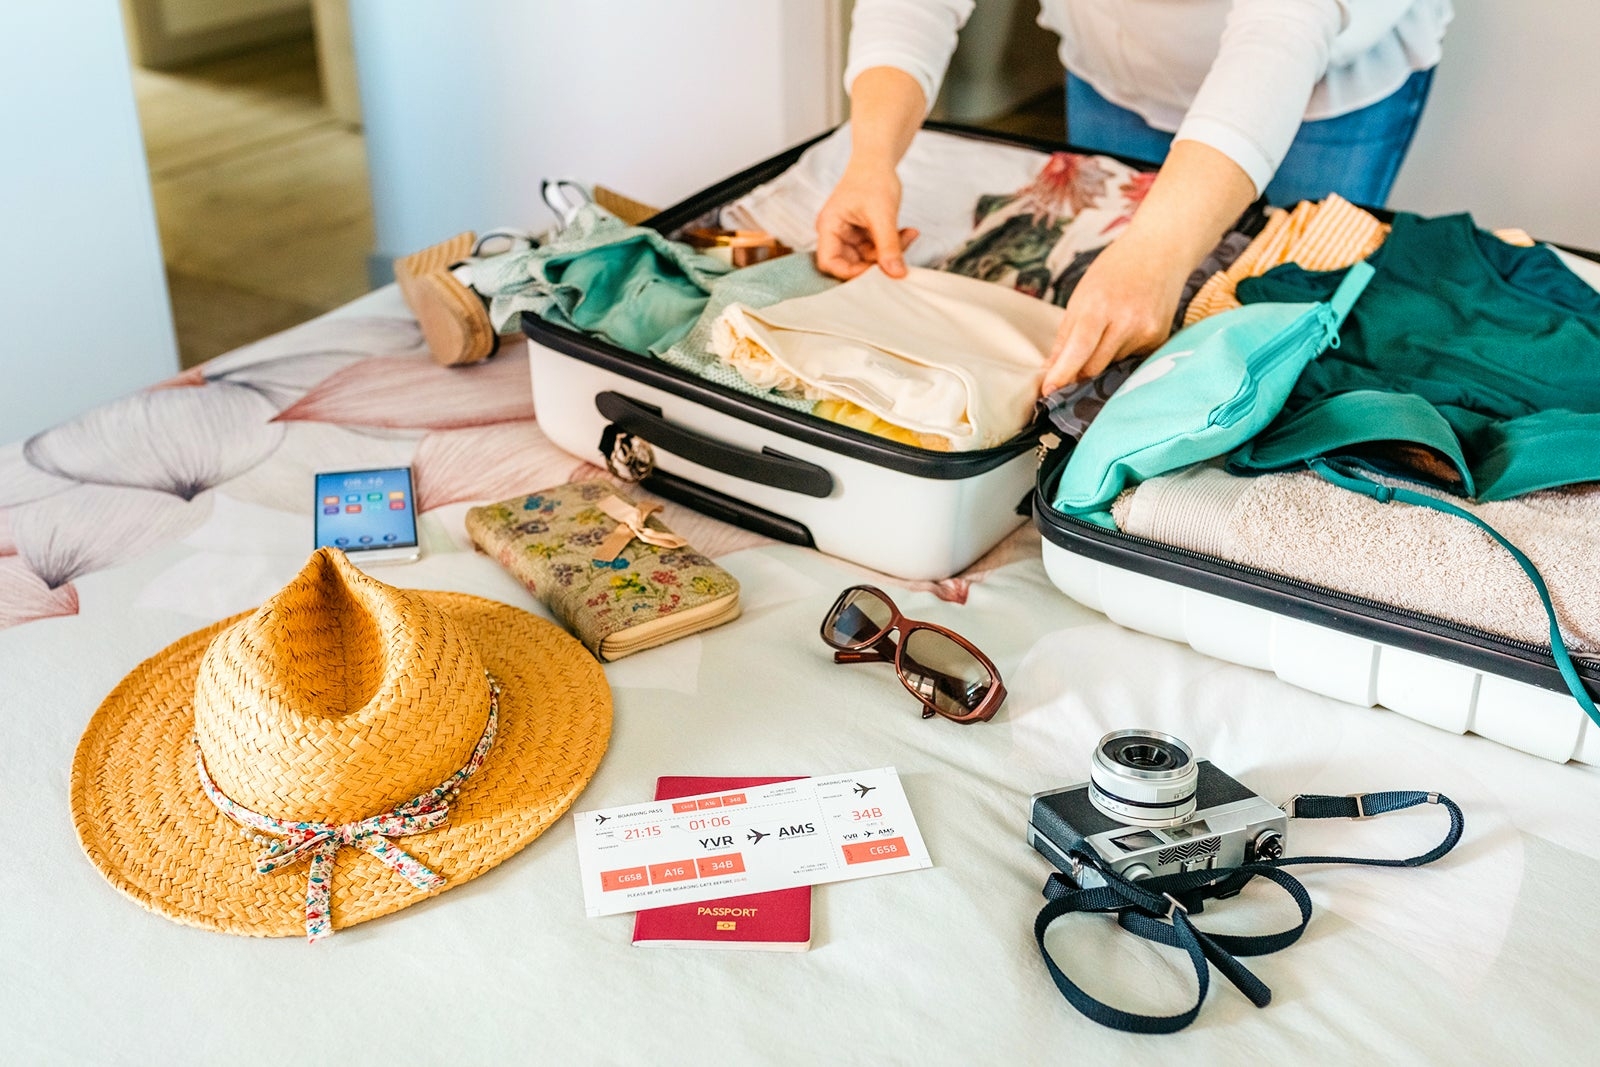 10 must-have travel accessories for under $ 15